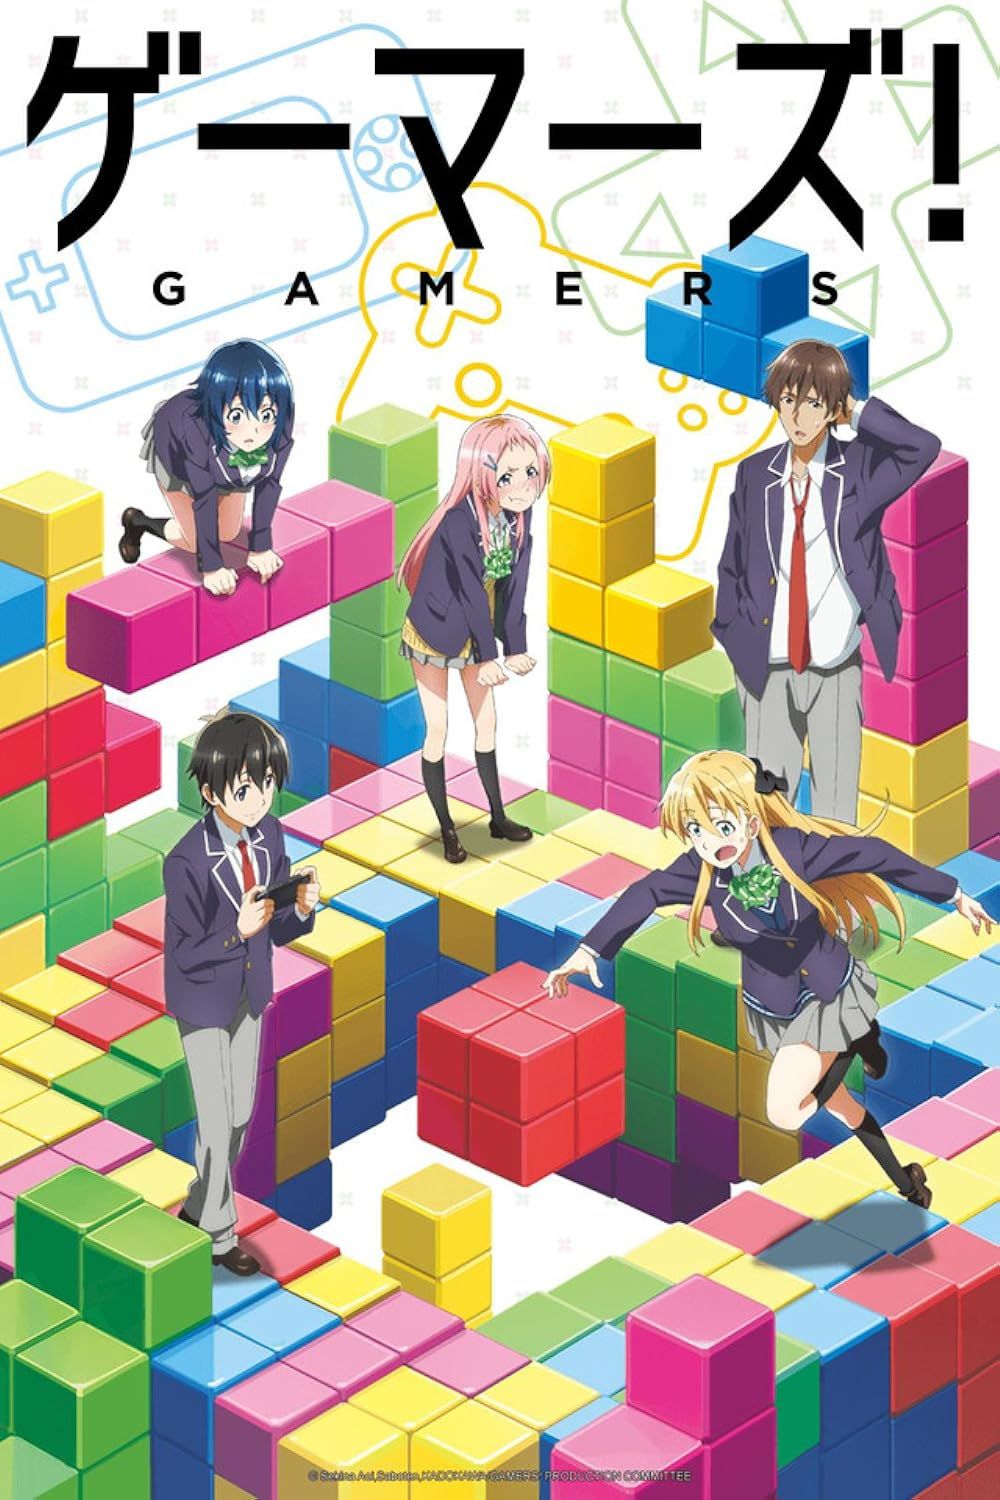 The official poster of Gamers! featuring the characters playing on tetris like blocks.